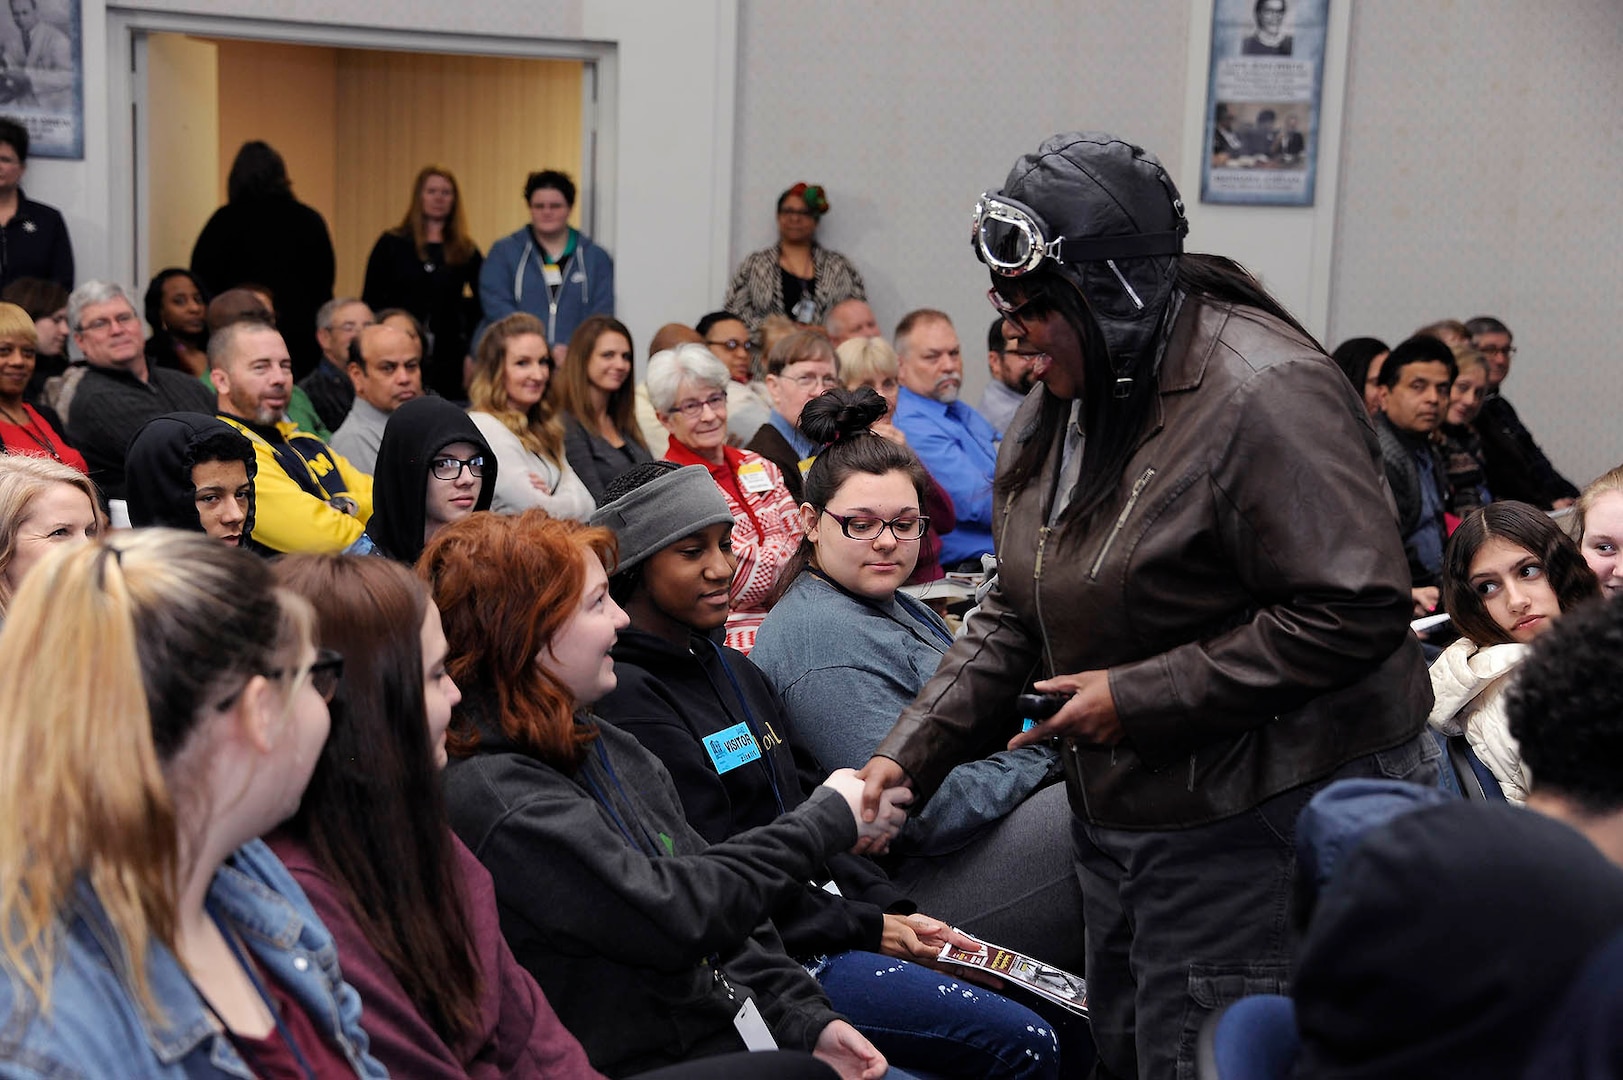 Gigi Coleman works the crowd as her great aunt and daredevil pilot Bessie Coleman during a Black History Month event at DLA Disposition Services headquarters in Michigan Feb. 28.